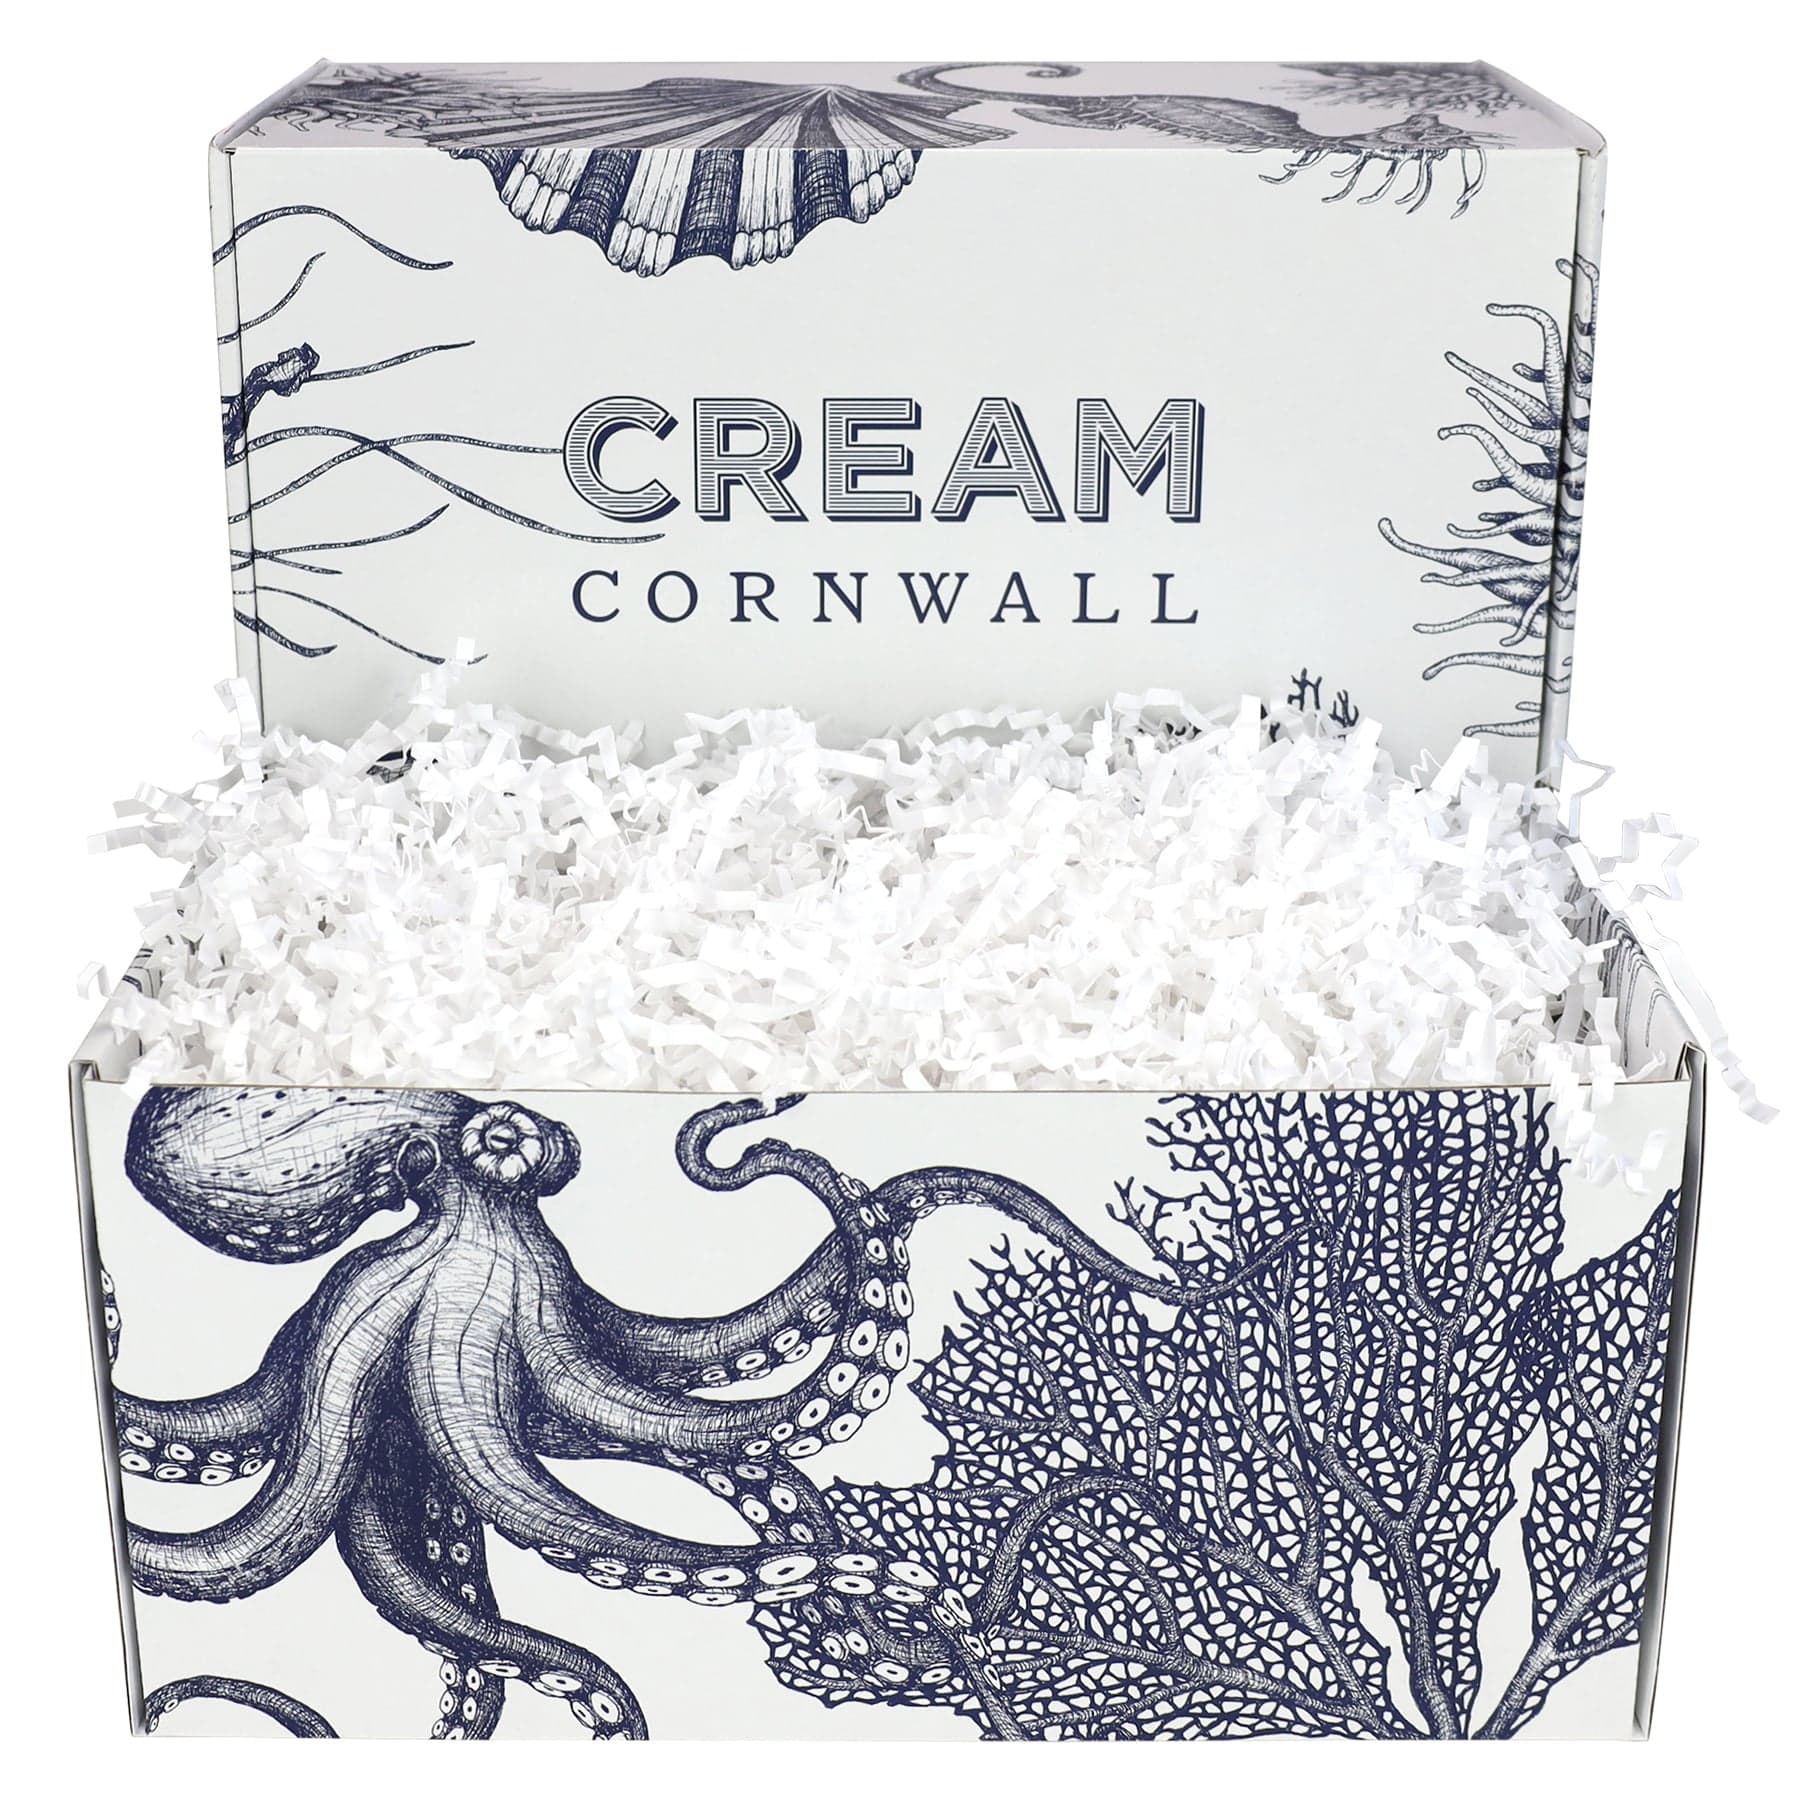 Image of our luxury hamper box which is decorated with our iconic blue and white octopus and shell design